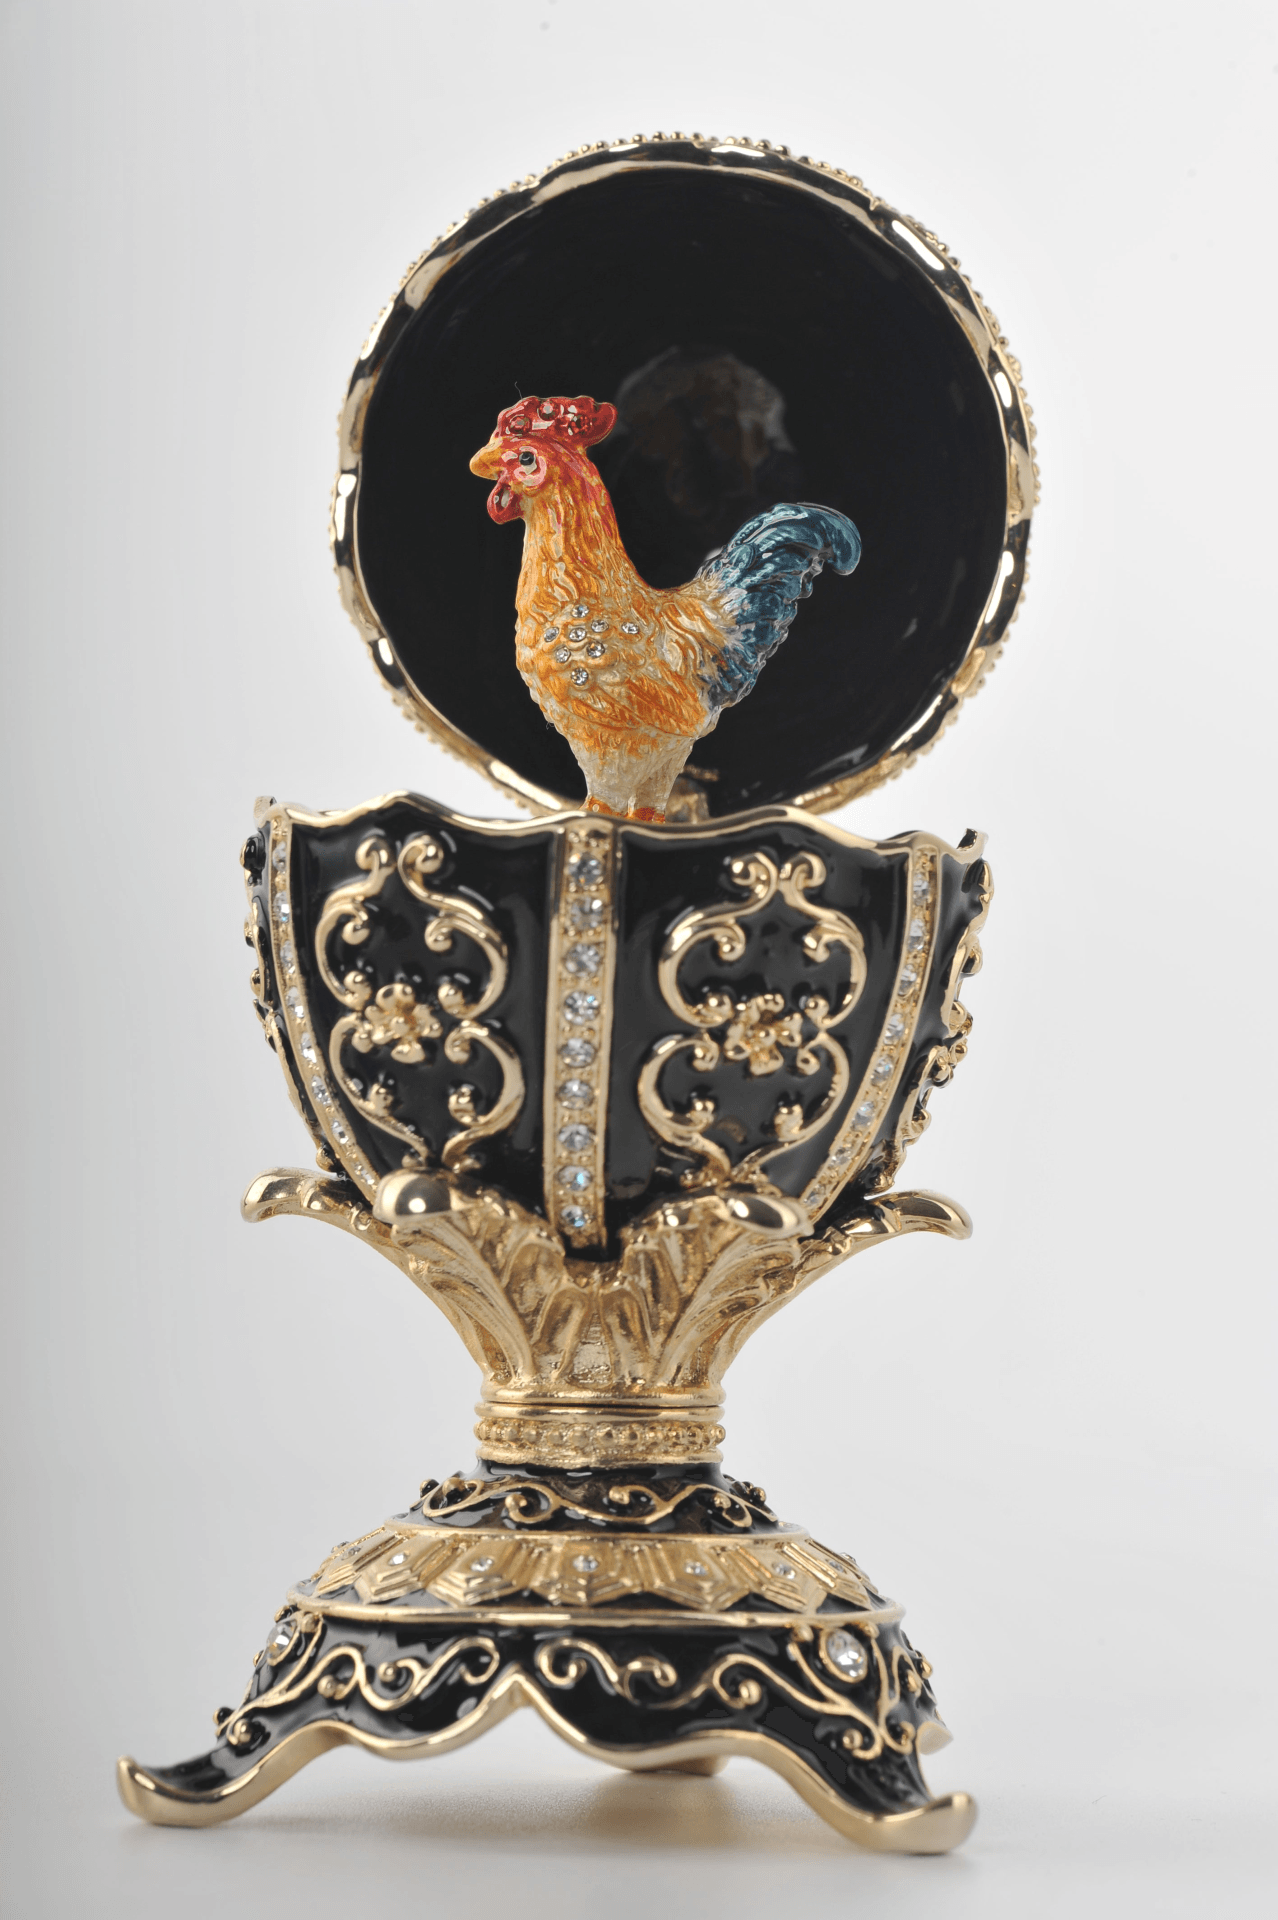 Black Faberge Egg with a Chicken Inside  